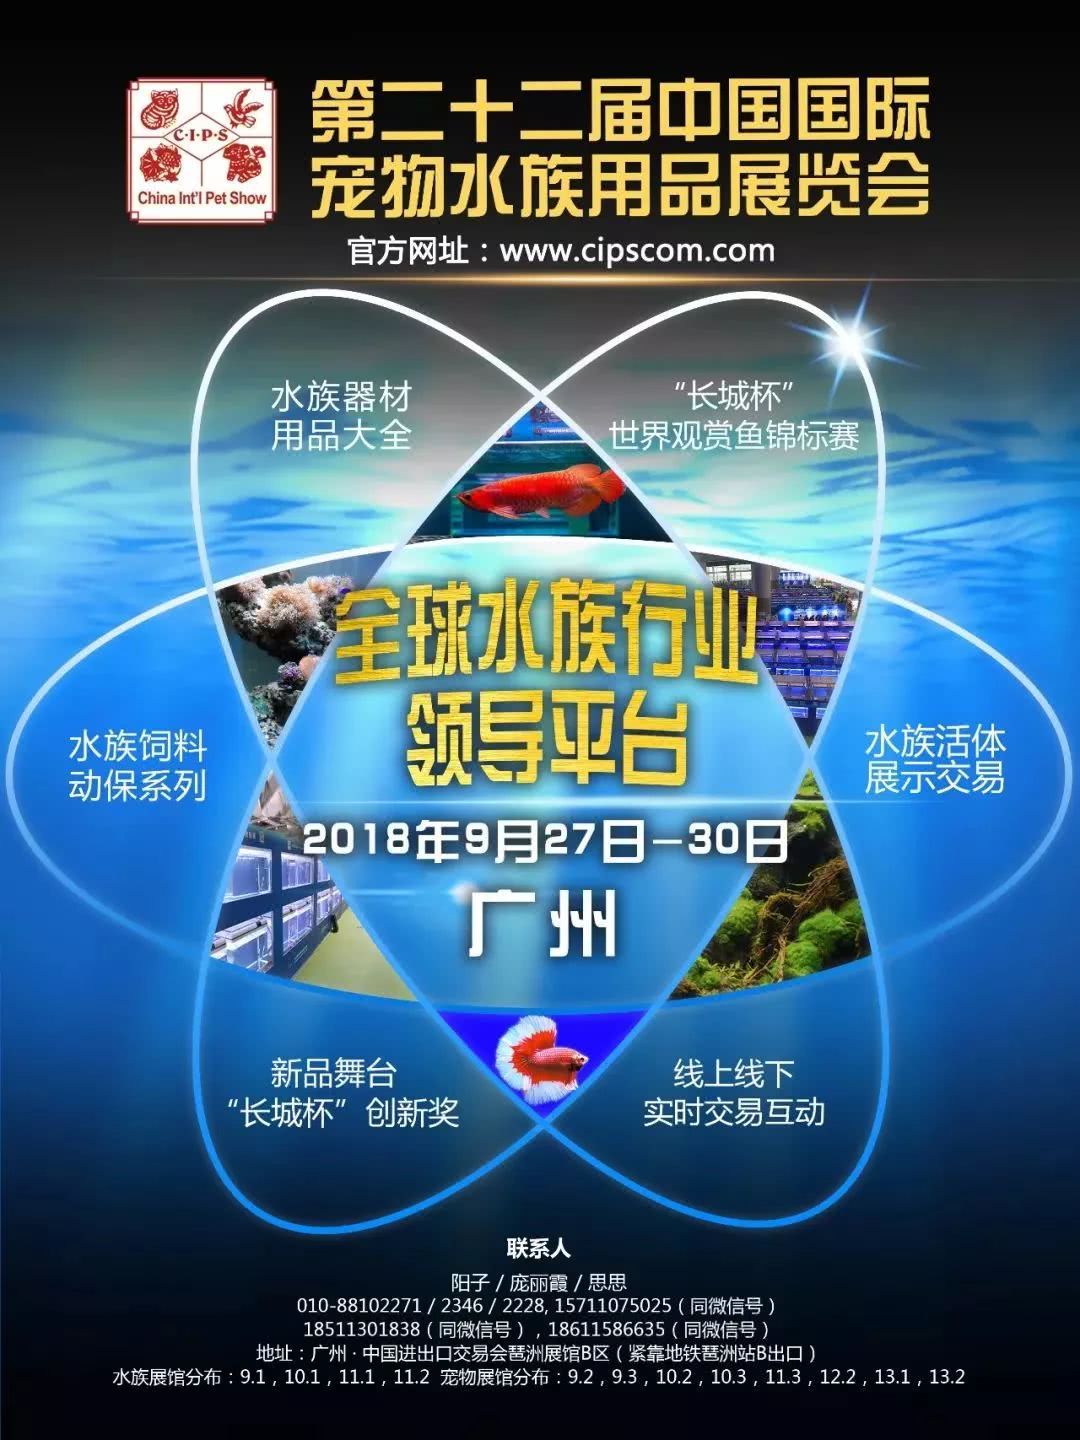 The pre-sale of the sponsored products of the Great Wall Cup World ornamental Fish Championships has begun.